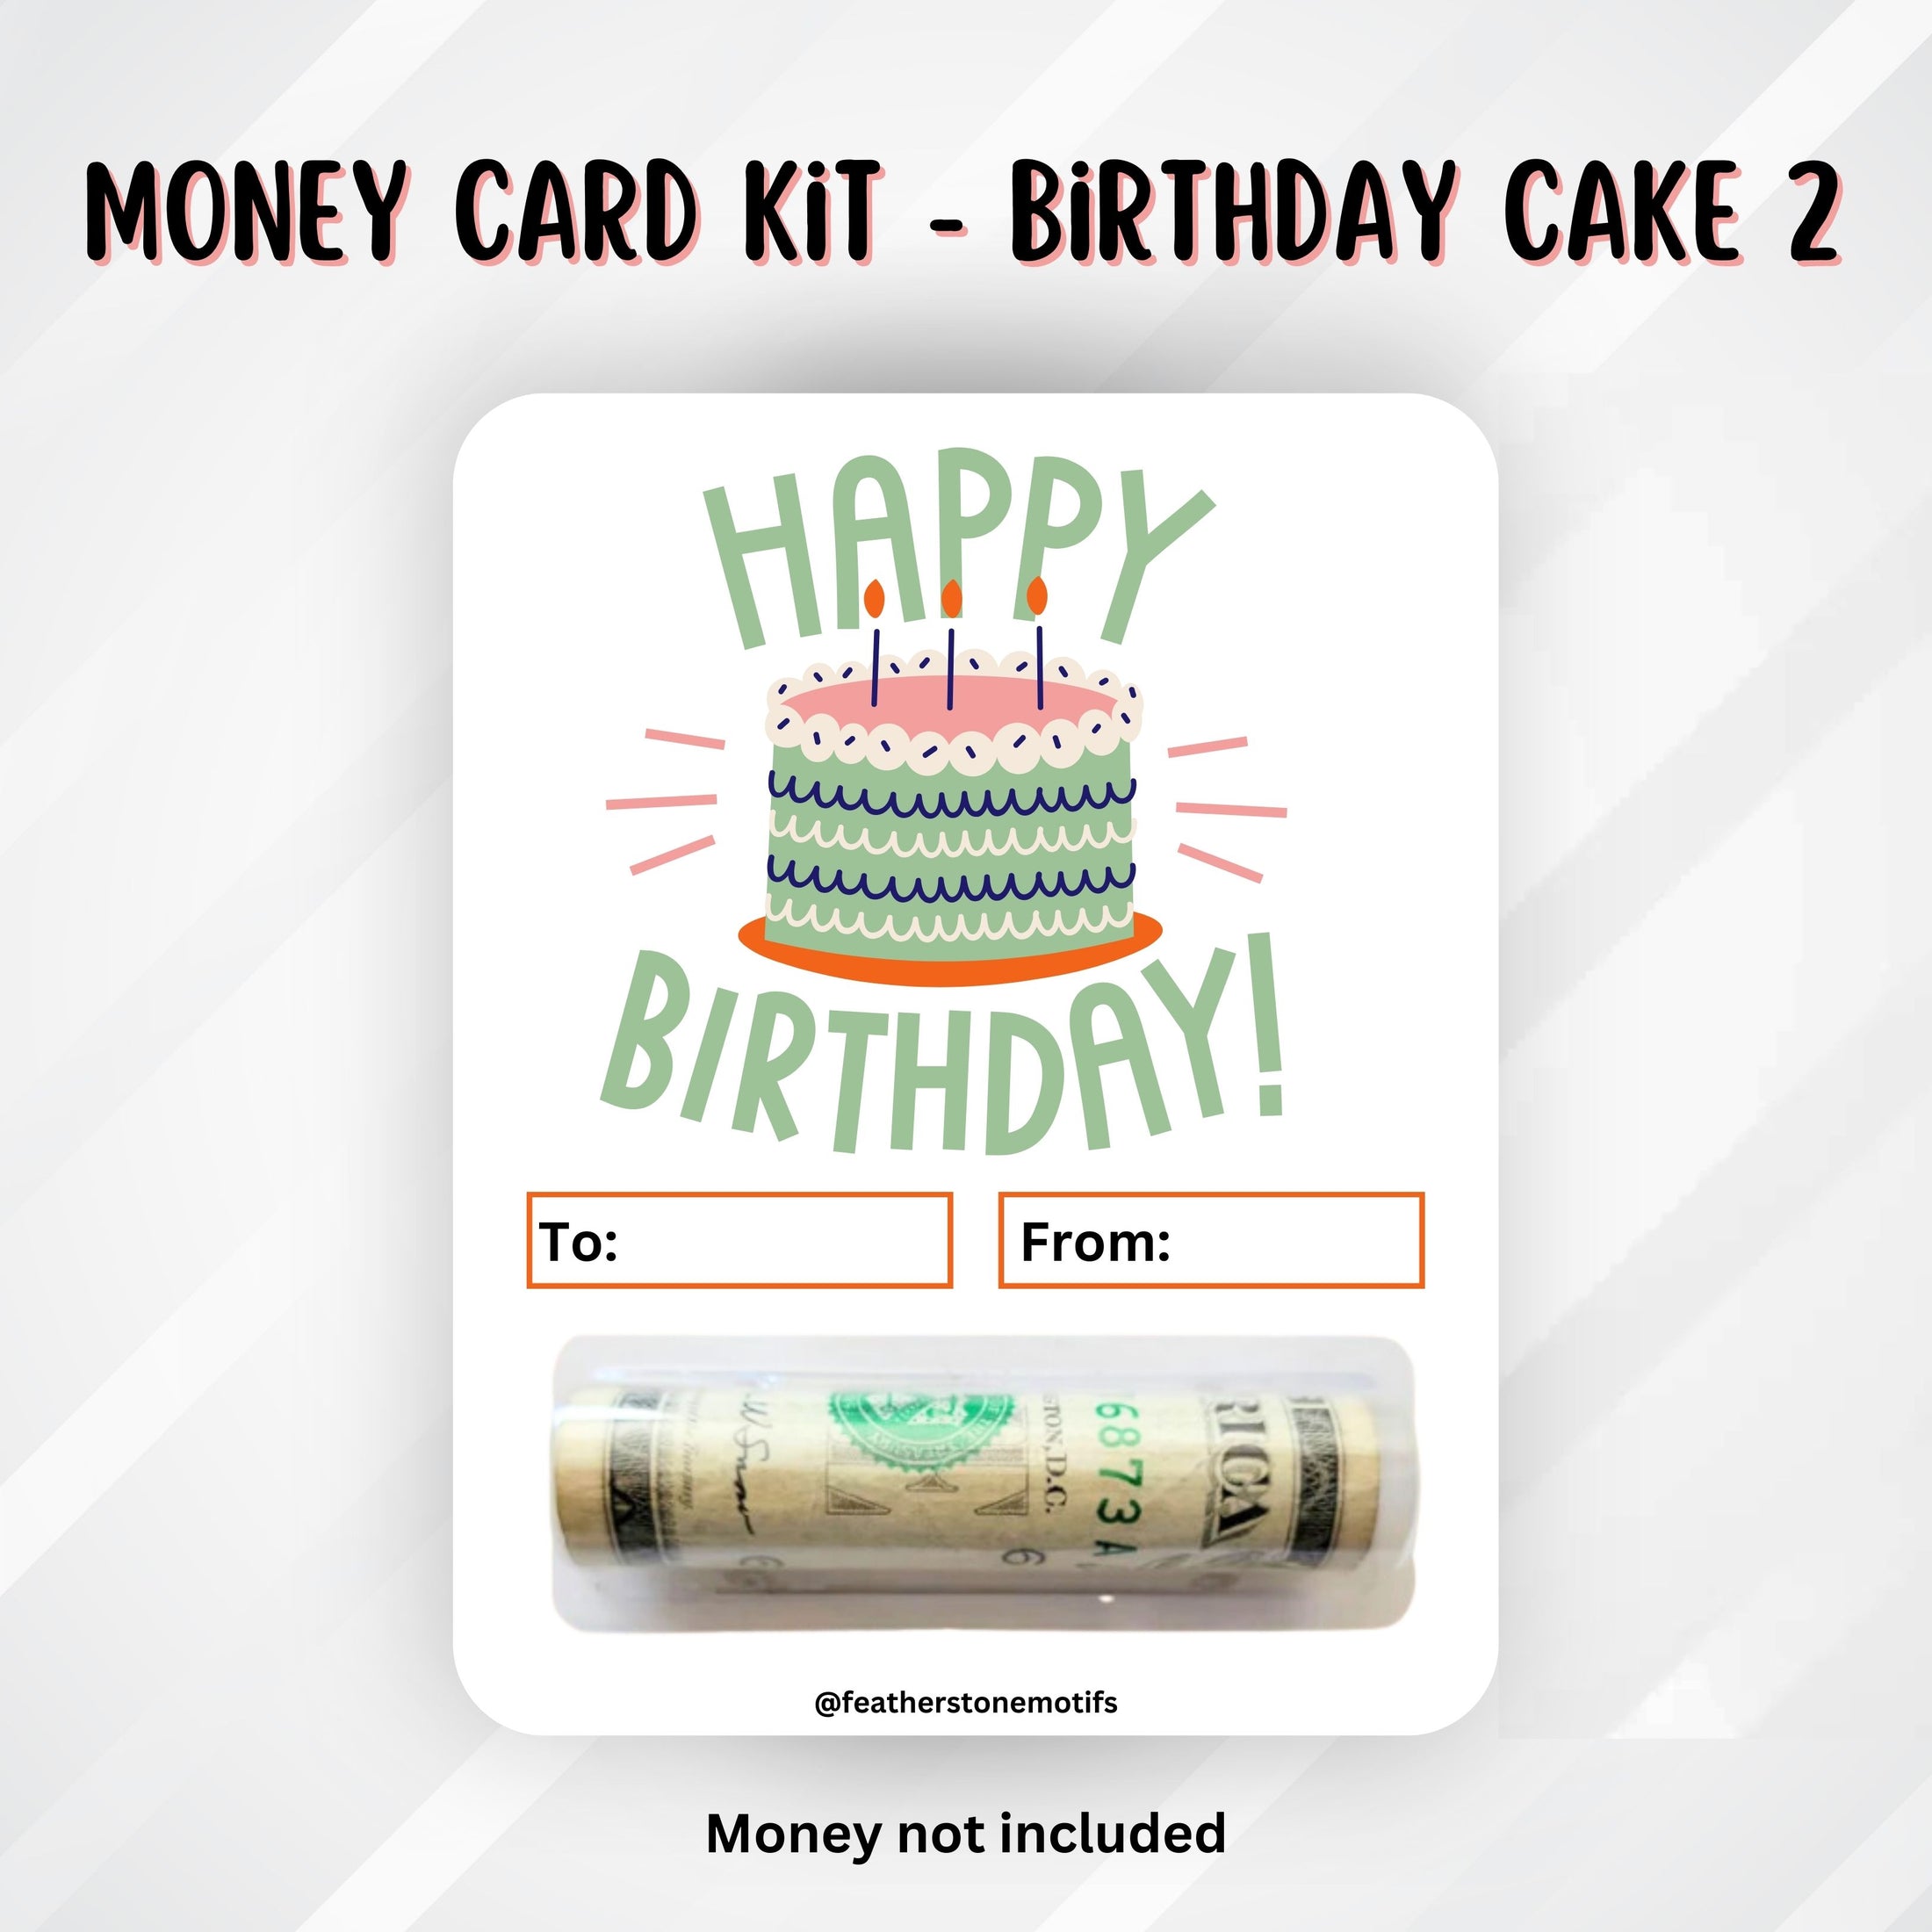 This image shows the money tube attached to the Birthday Cake 2 Money Card.